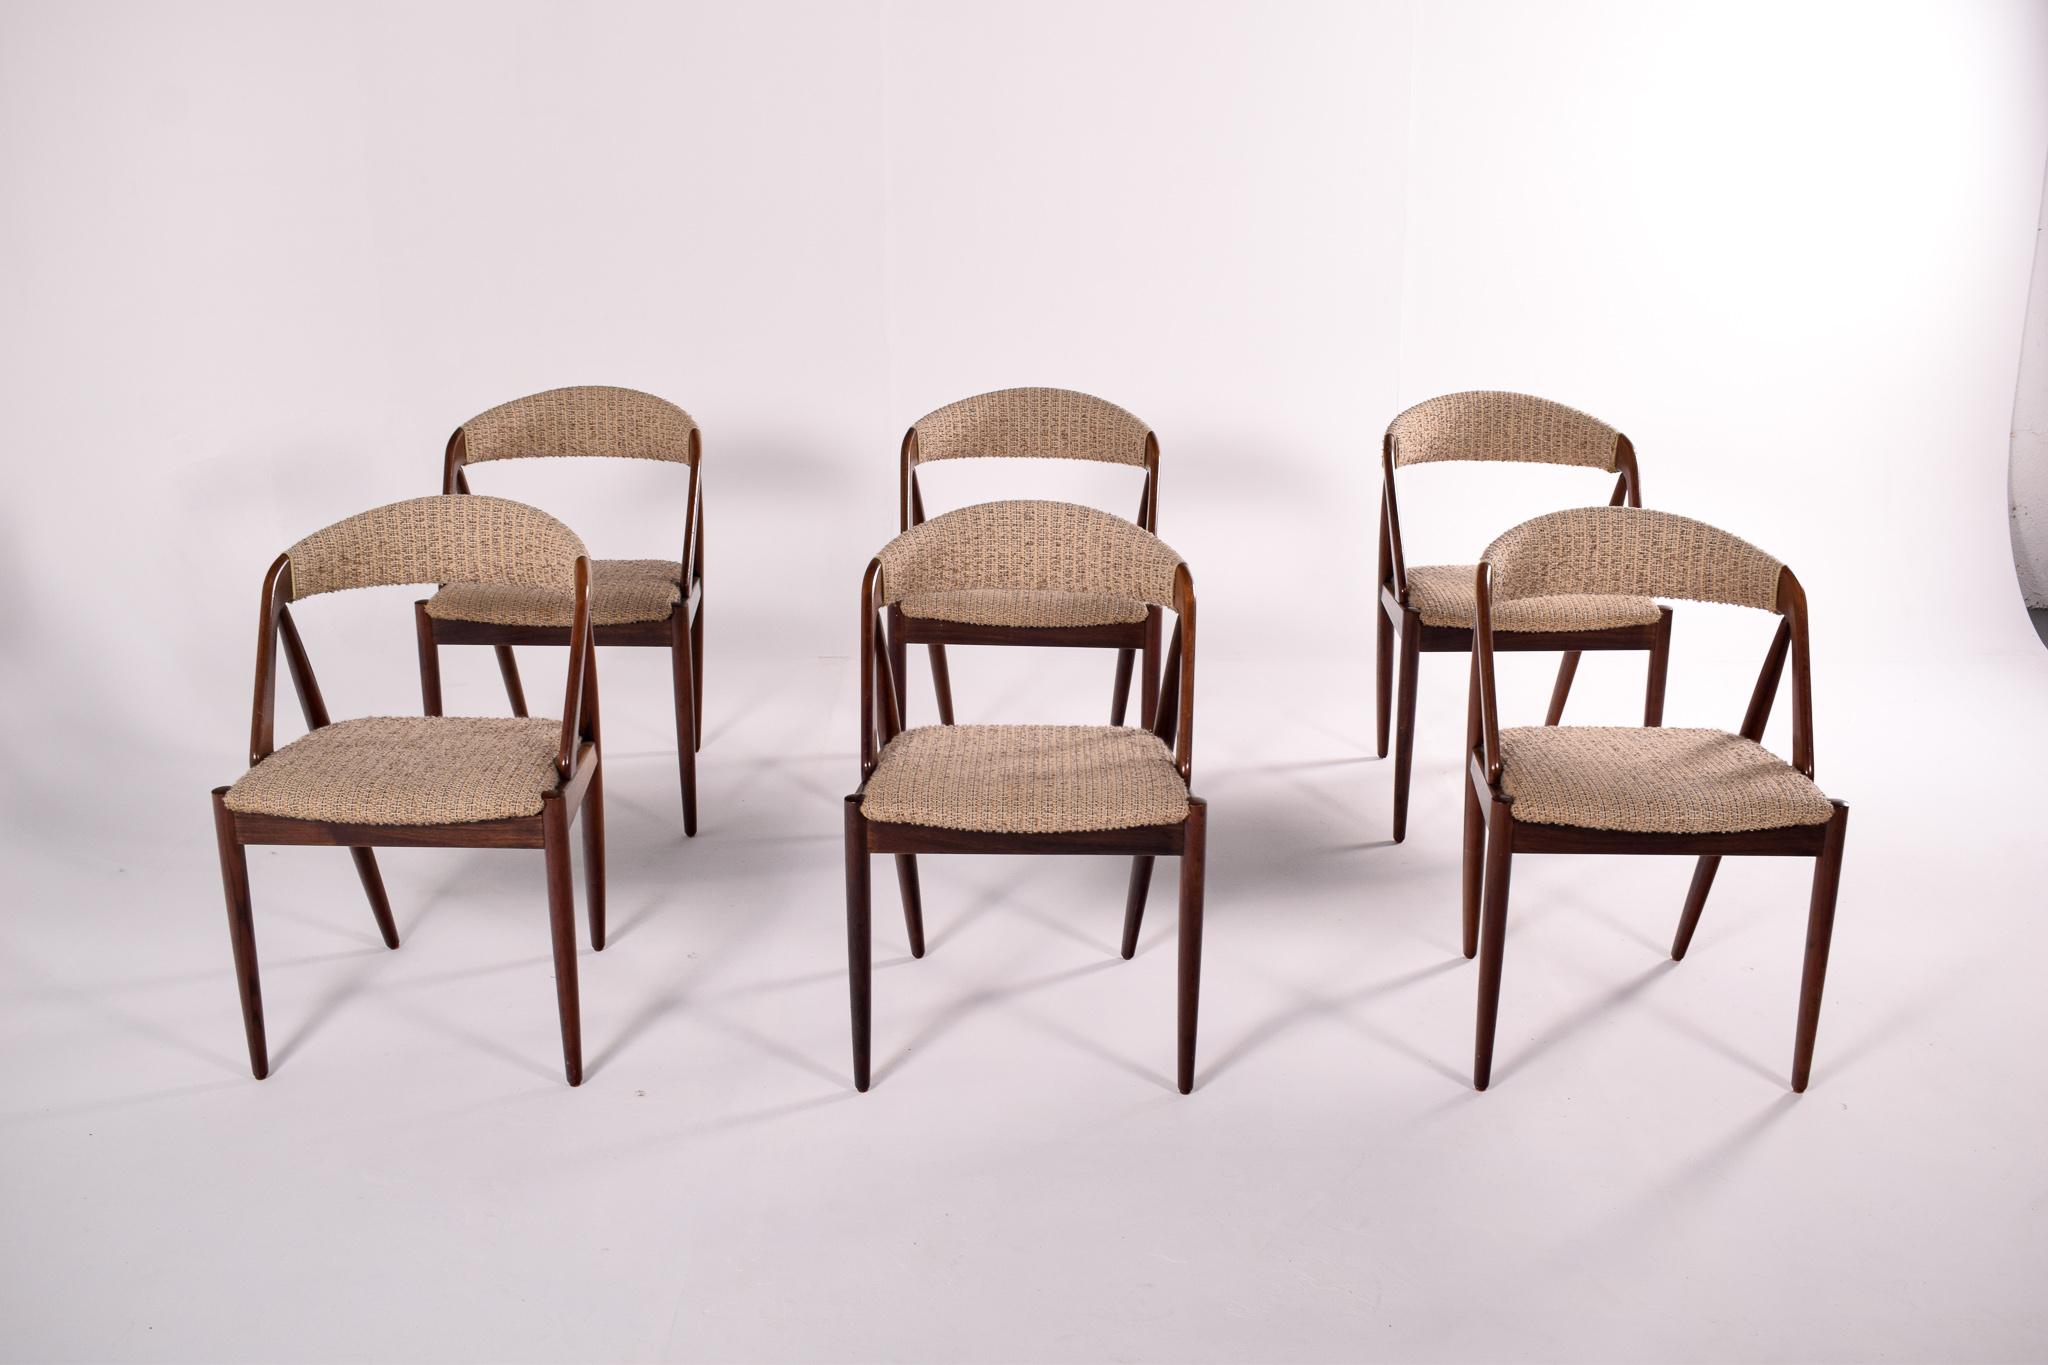 Mid century set of six rosewood and fabric dining chairs by Kai Kristiansen. Model 31. These Danish Mid-Century dining chairs were designed by Kai Kristiansen in 1960. Rosewood framed and original fabric upholstery. Set of 6 comfortable chairs with